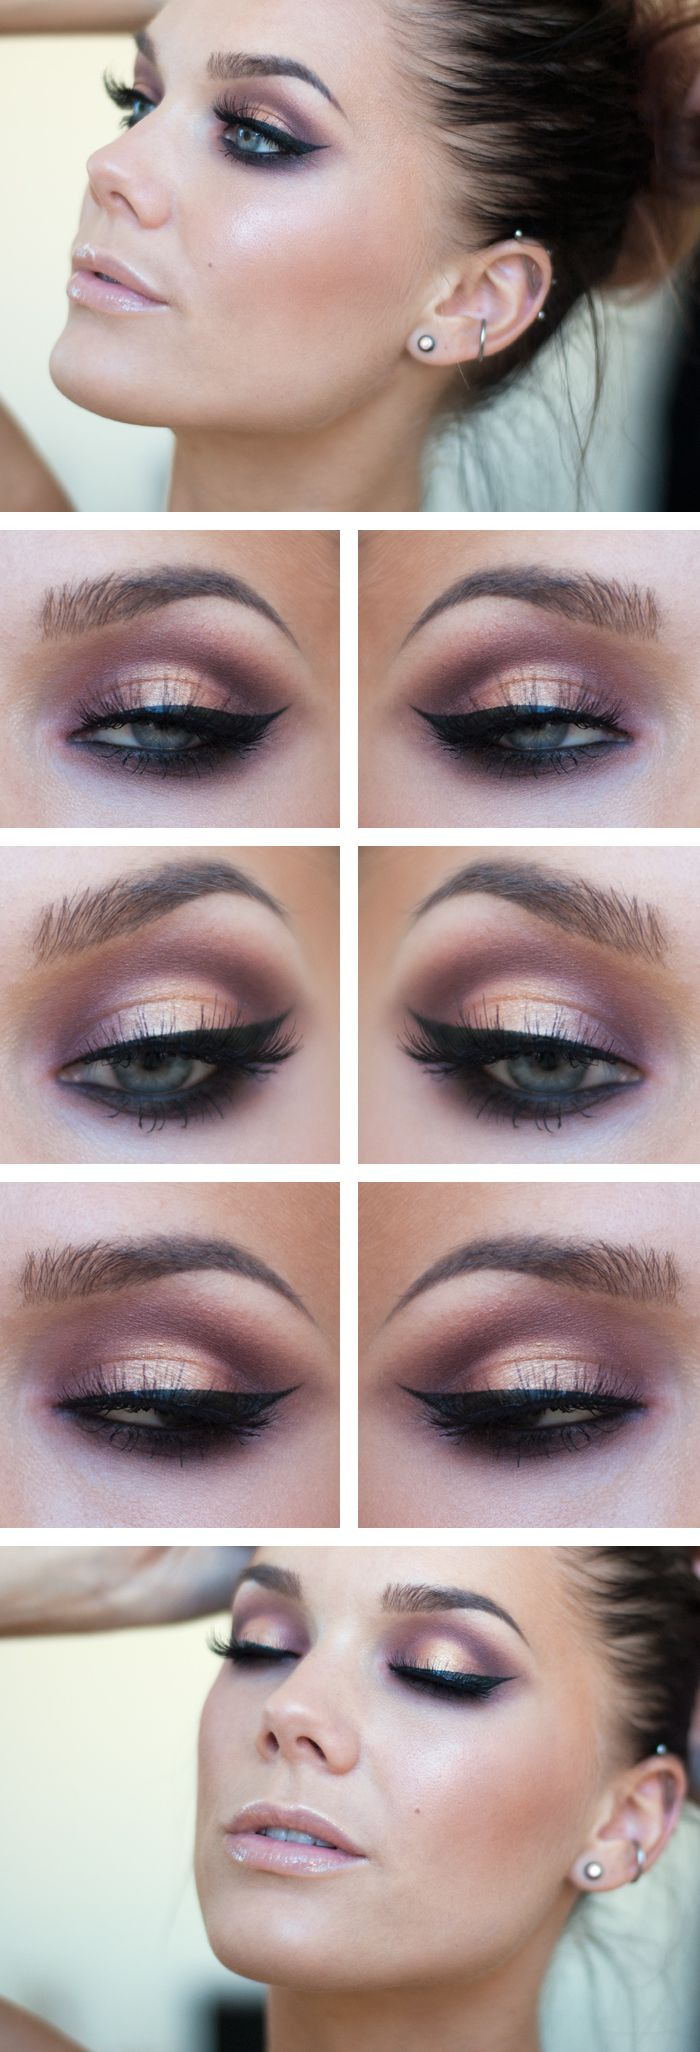 Light Eye Makeup Simple Yet Stylish Light Makeup Ideas To Try For Daily Occasions